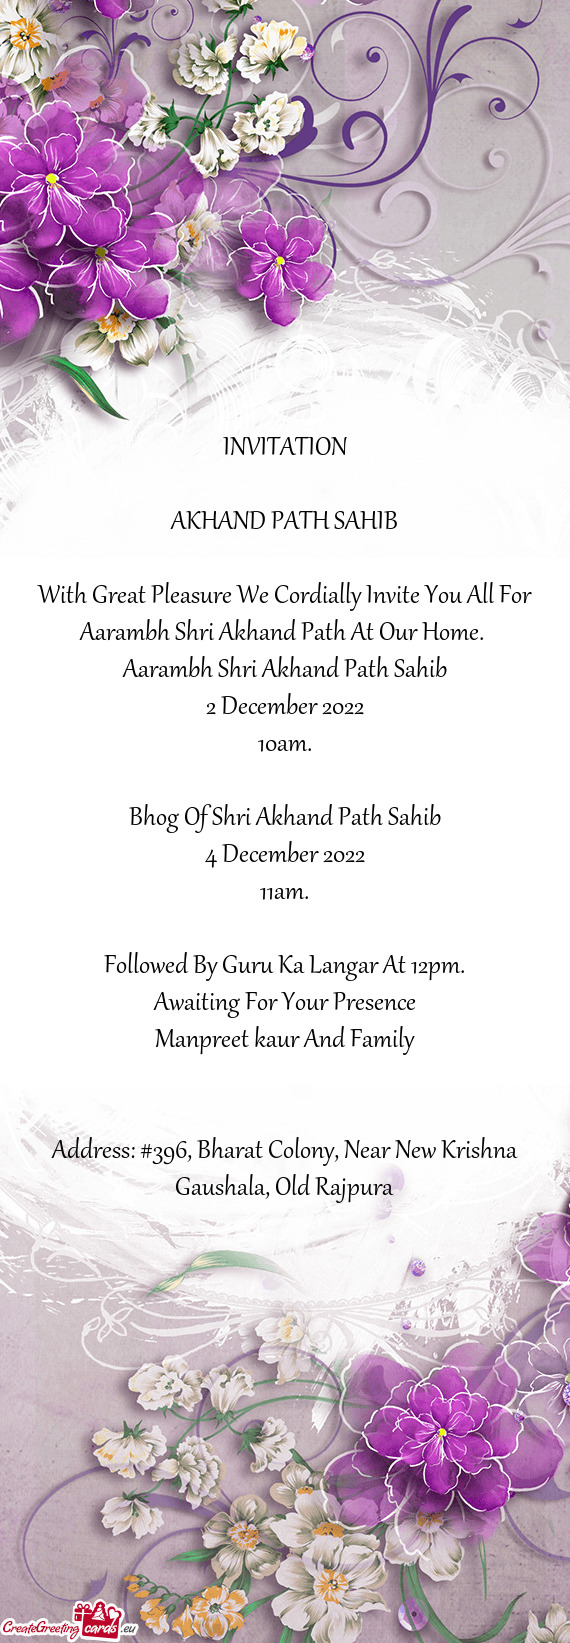 With Great Pleasure We Cordially Invite You All For Aarambh Shri Akhand Path At Our Home